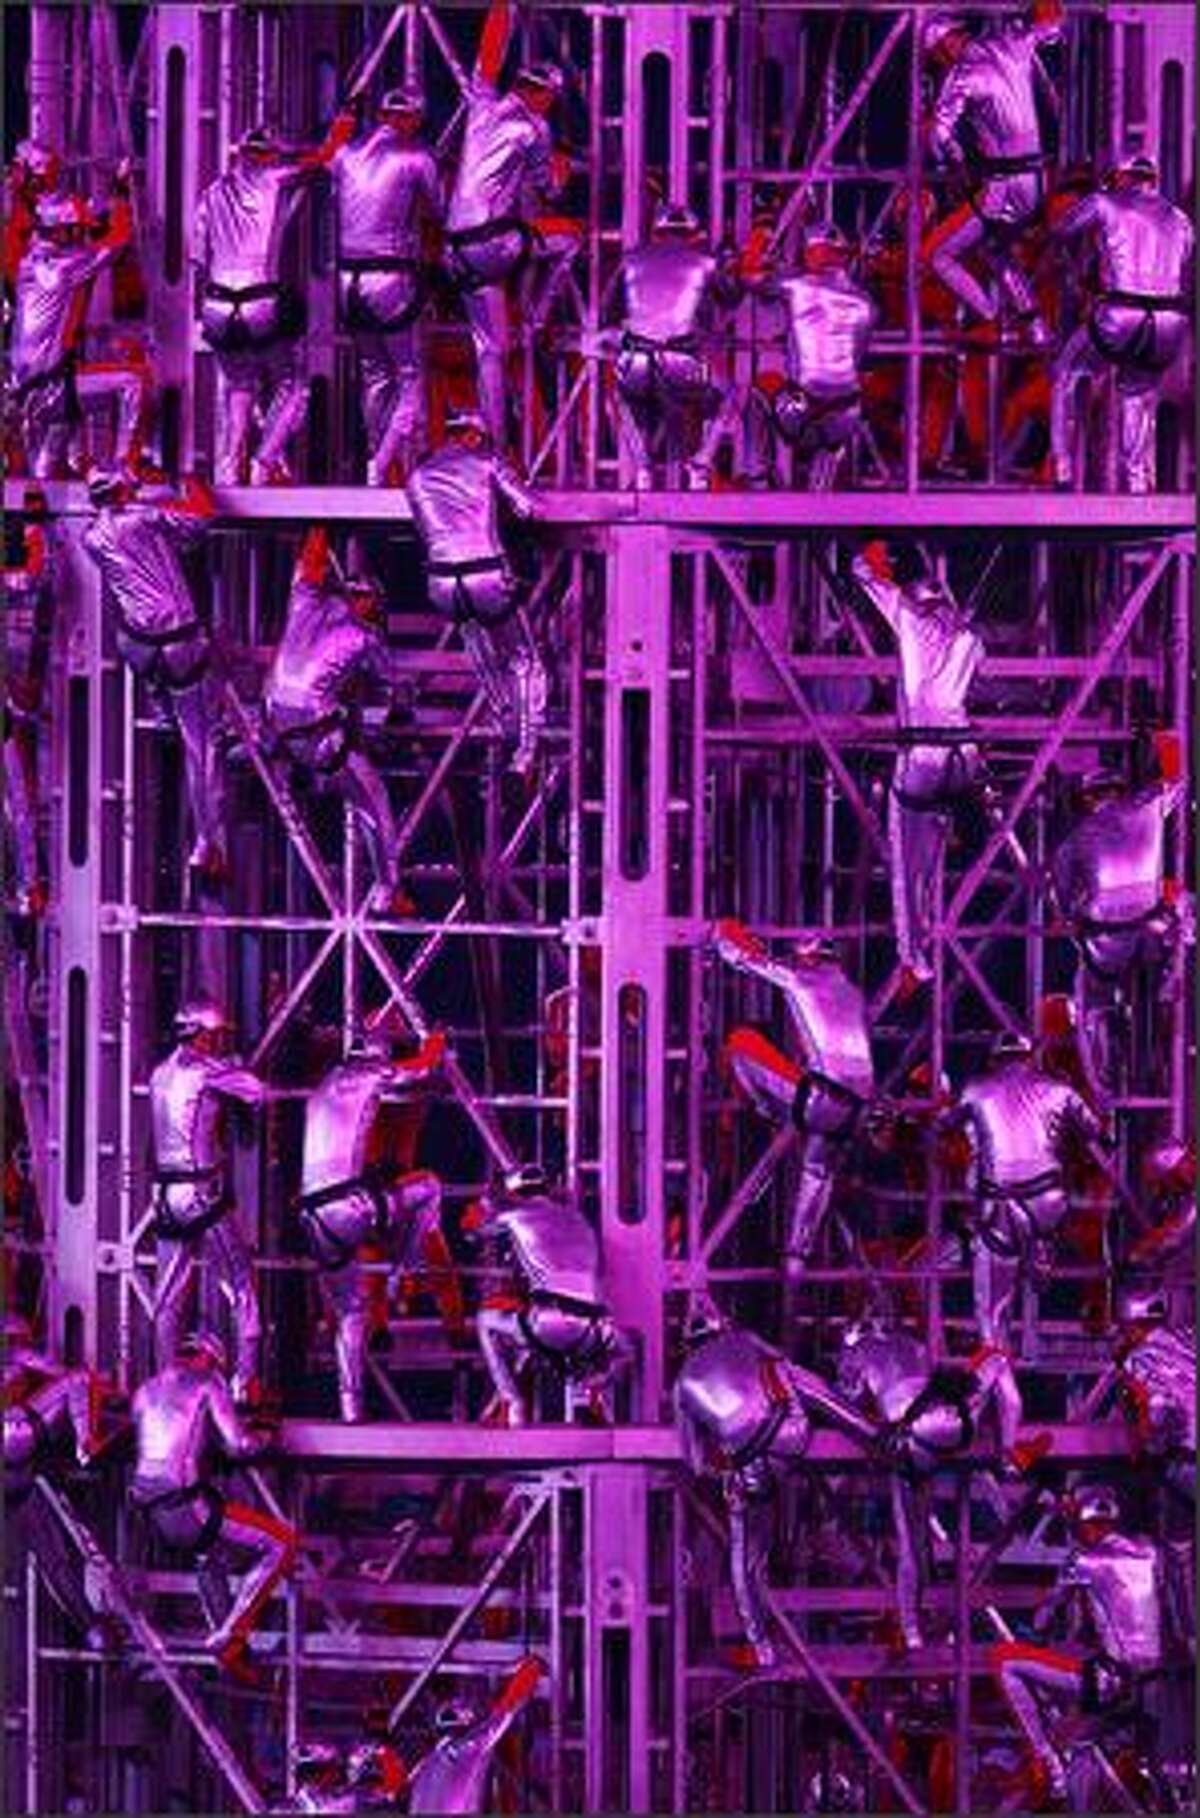 Acrobats perform during the Closing Ceremony for the Beijing 2008 Olympic Games on Sunday in Beijing.